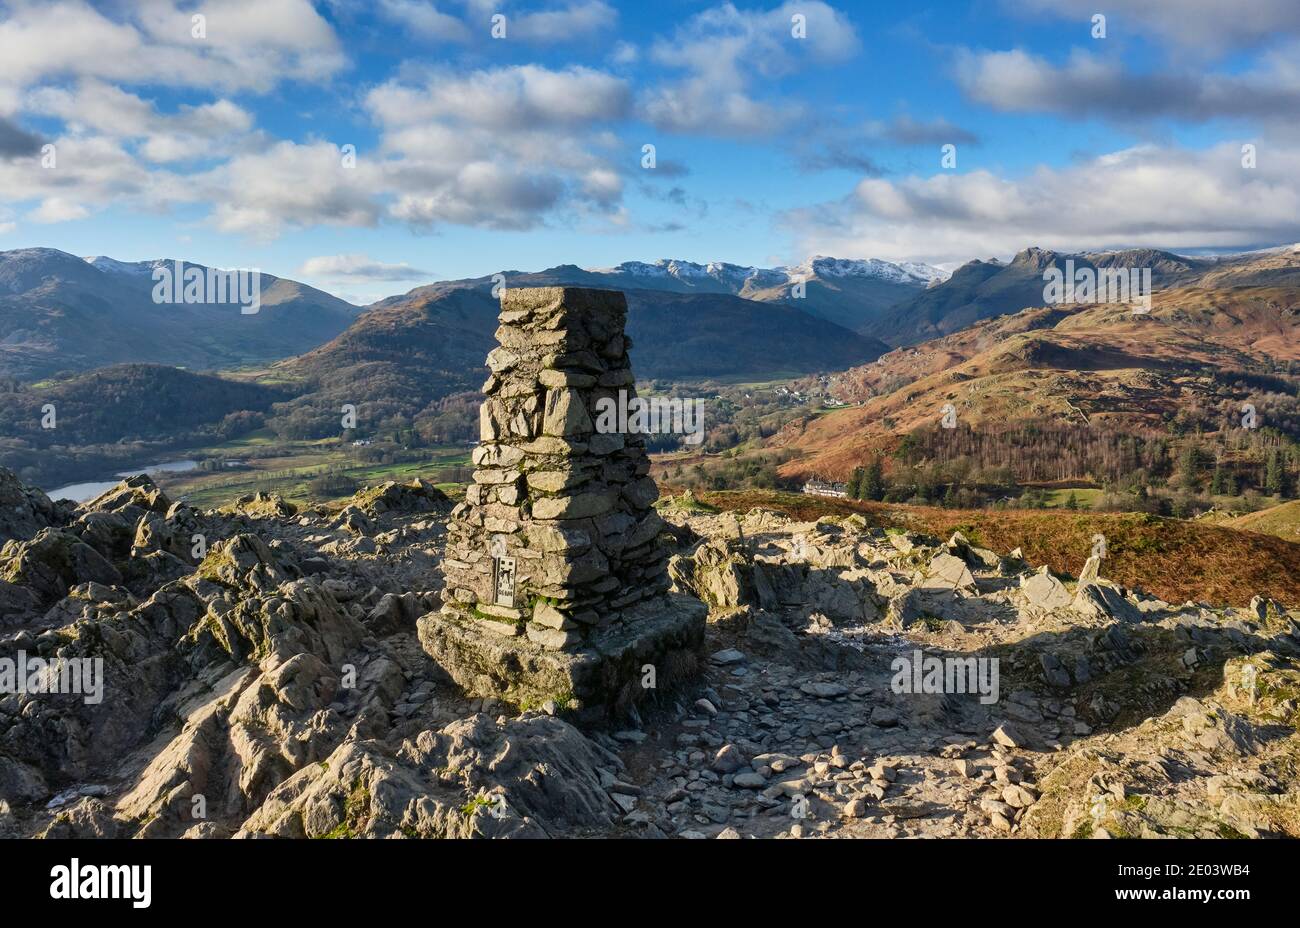 Lingmoor Fell, Crinkle Crags, Bowfell, die Langdale Pikes und Chapel Stile vom Gipfel des Loughrigg Fell gesehen, Grasmere, Lake District, Cumbria Stockfoto